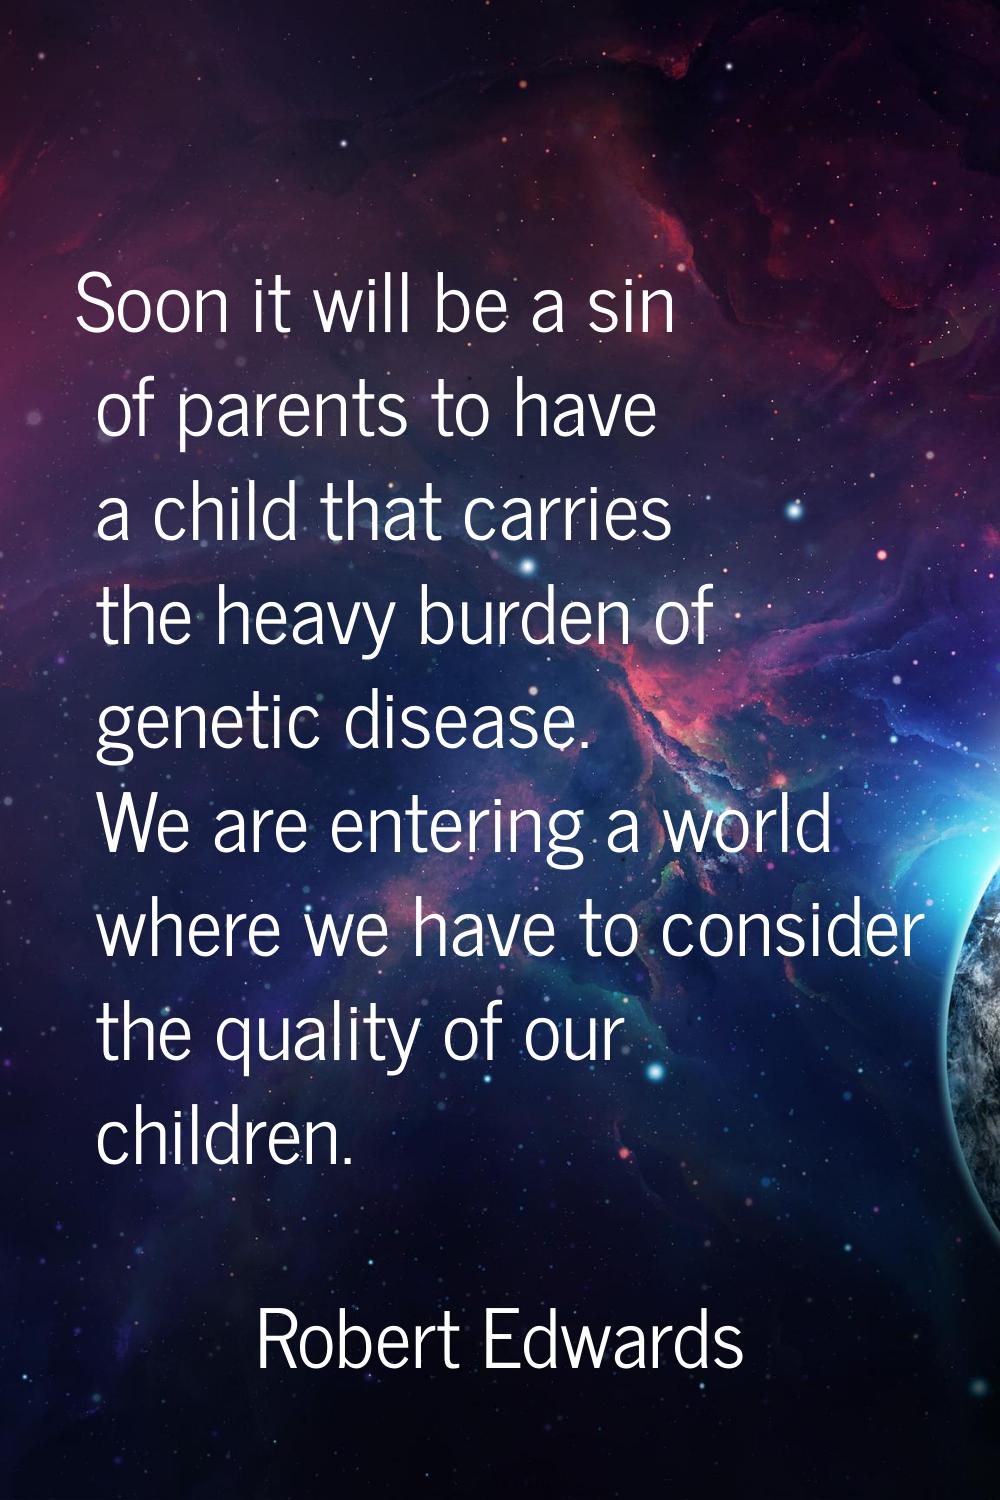 Soon it will be a sin of parents to have a child that carries the heavy burden of genetic disease. 